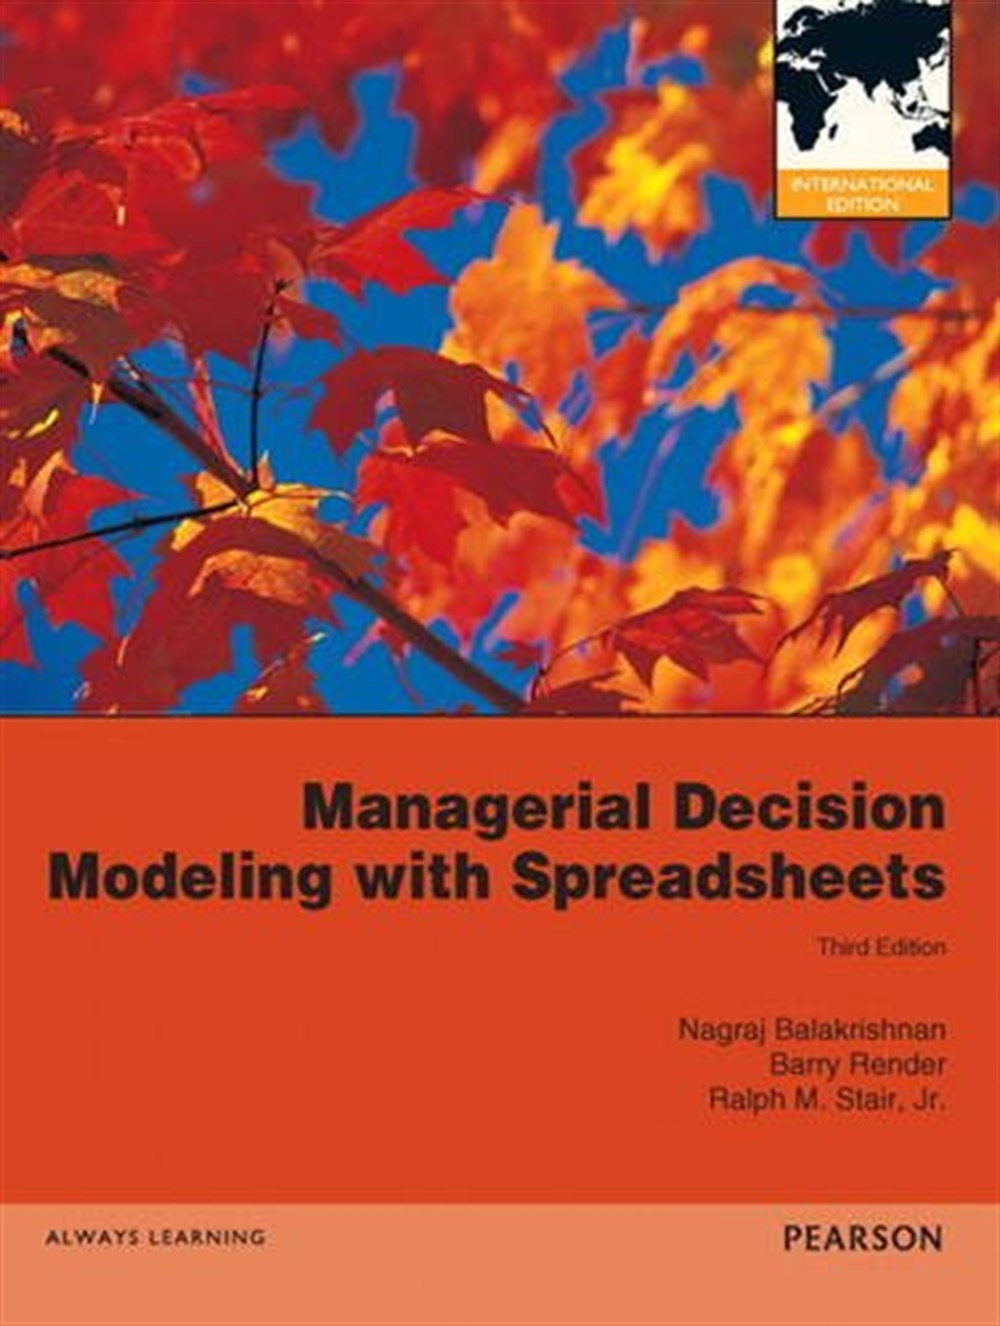 Managerial Decision Modeling with Spreadsheets, 3rd Ed. (International Edition)